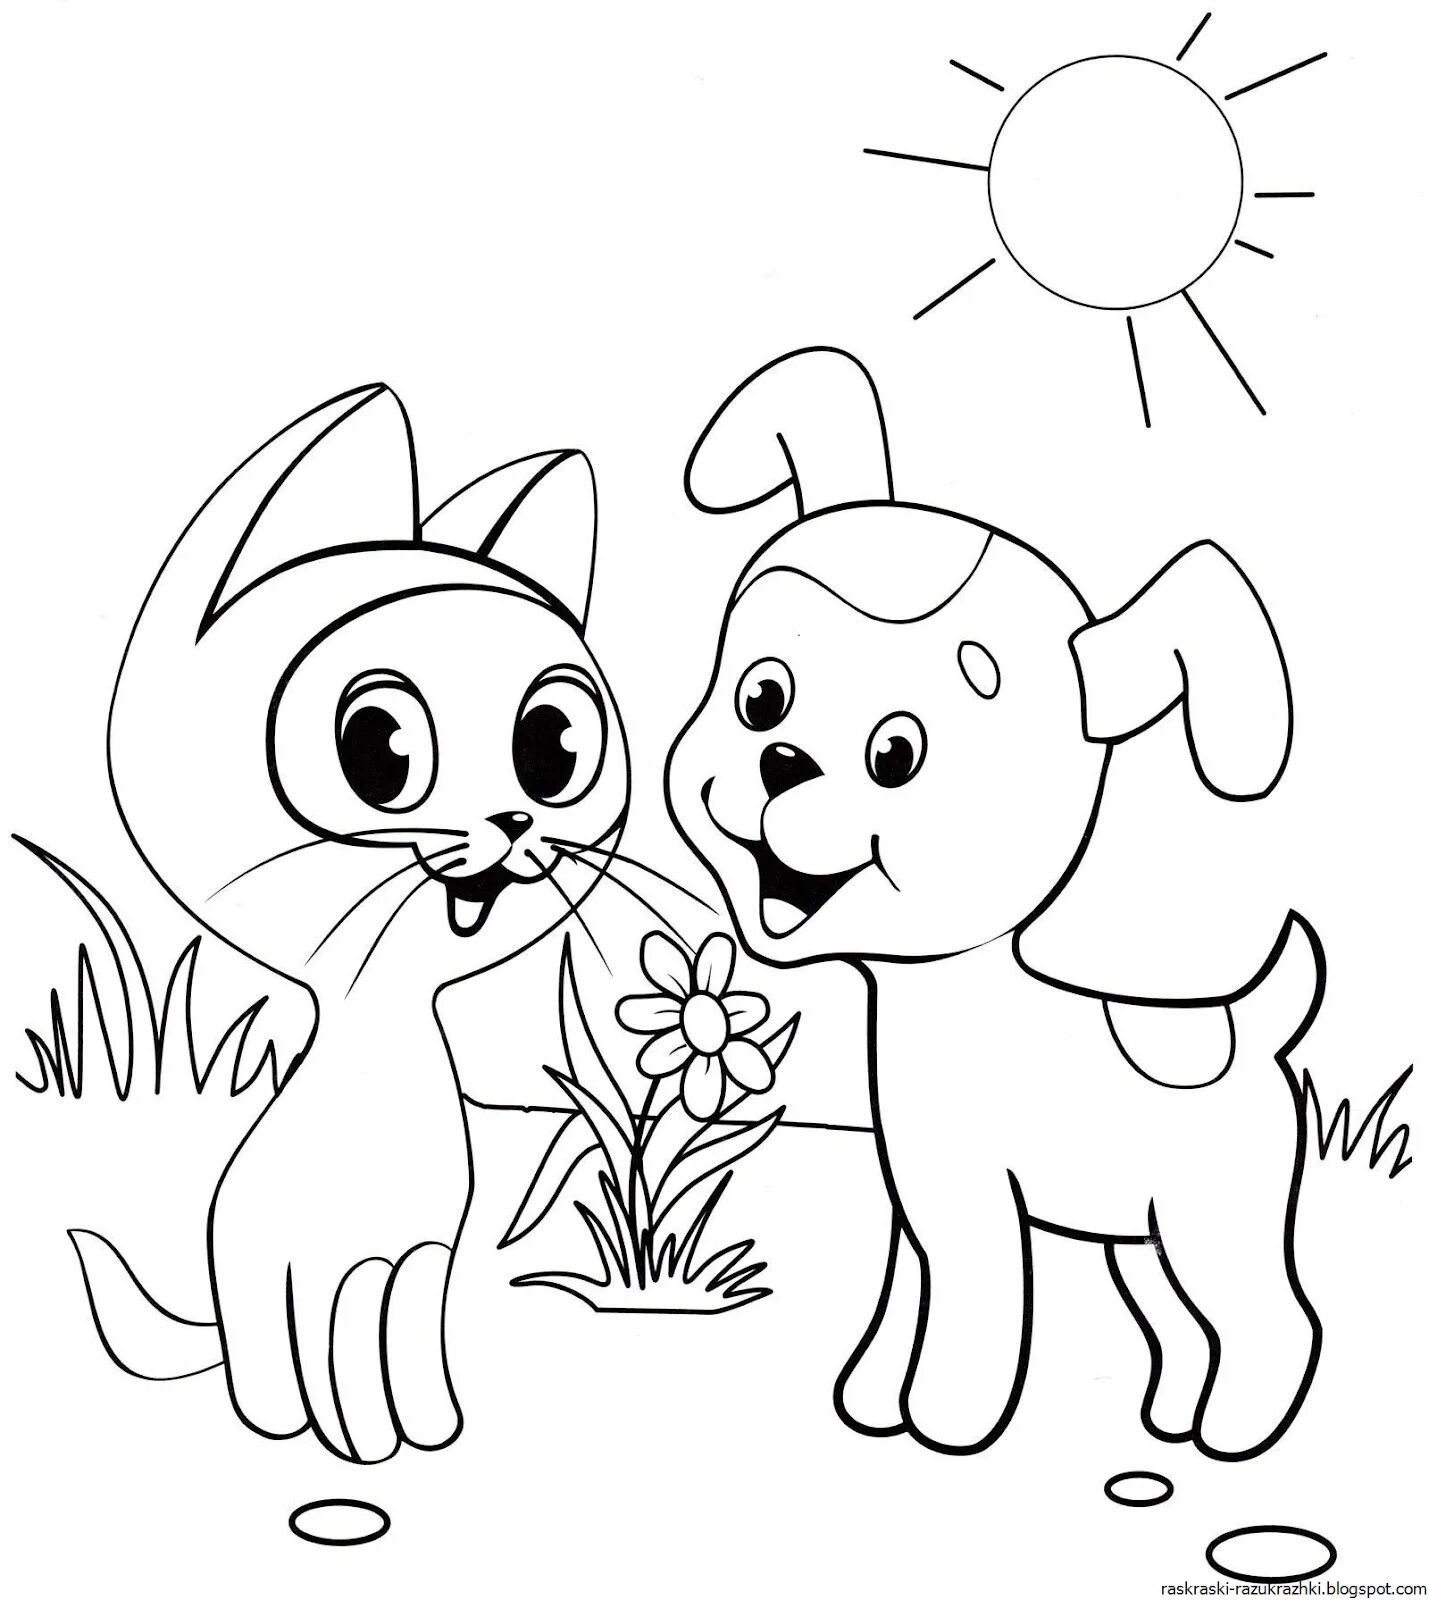 Witty cat and dog coloring pages for kids 3 4 years old